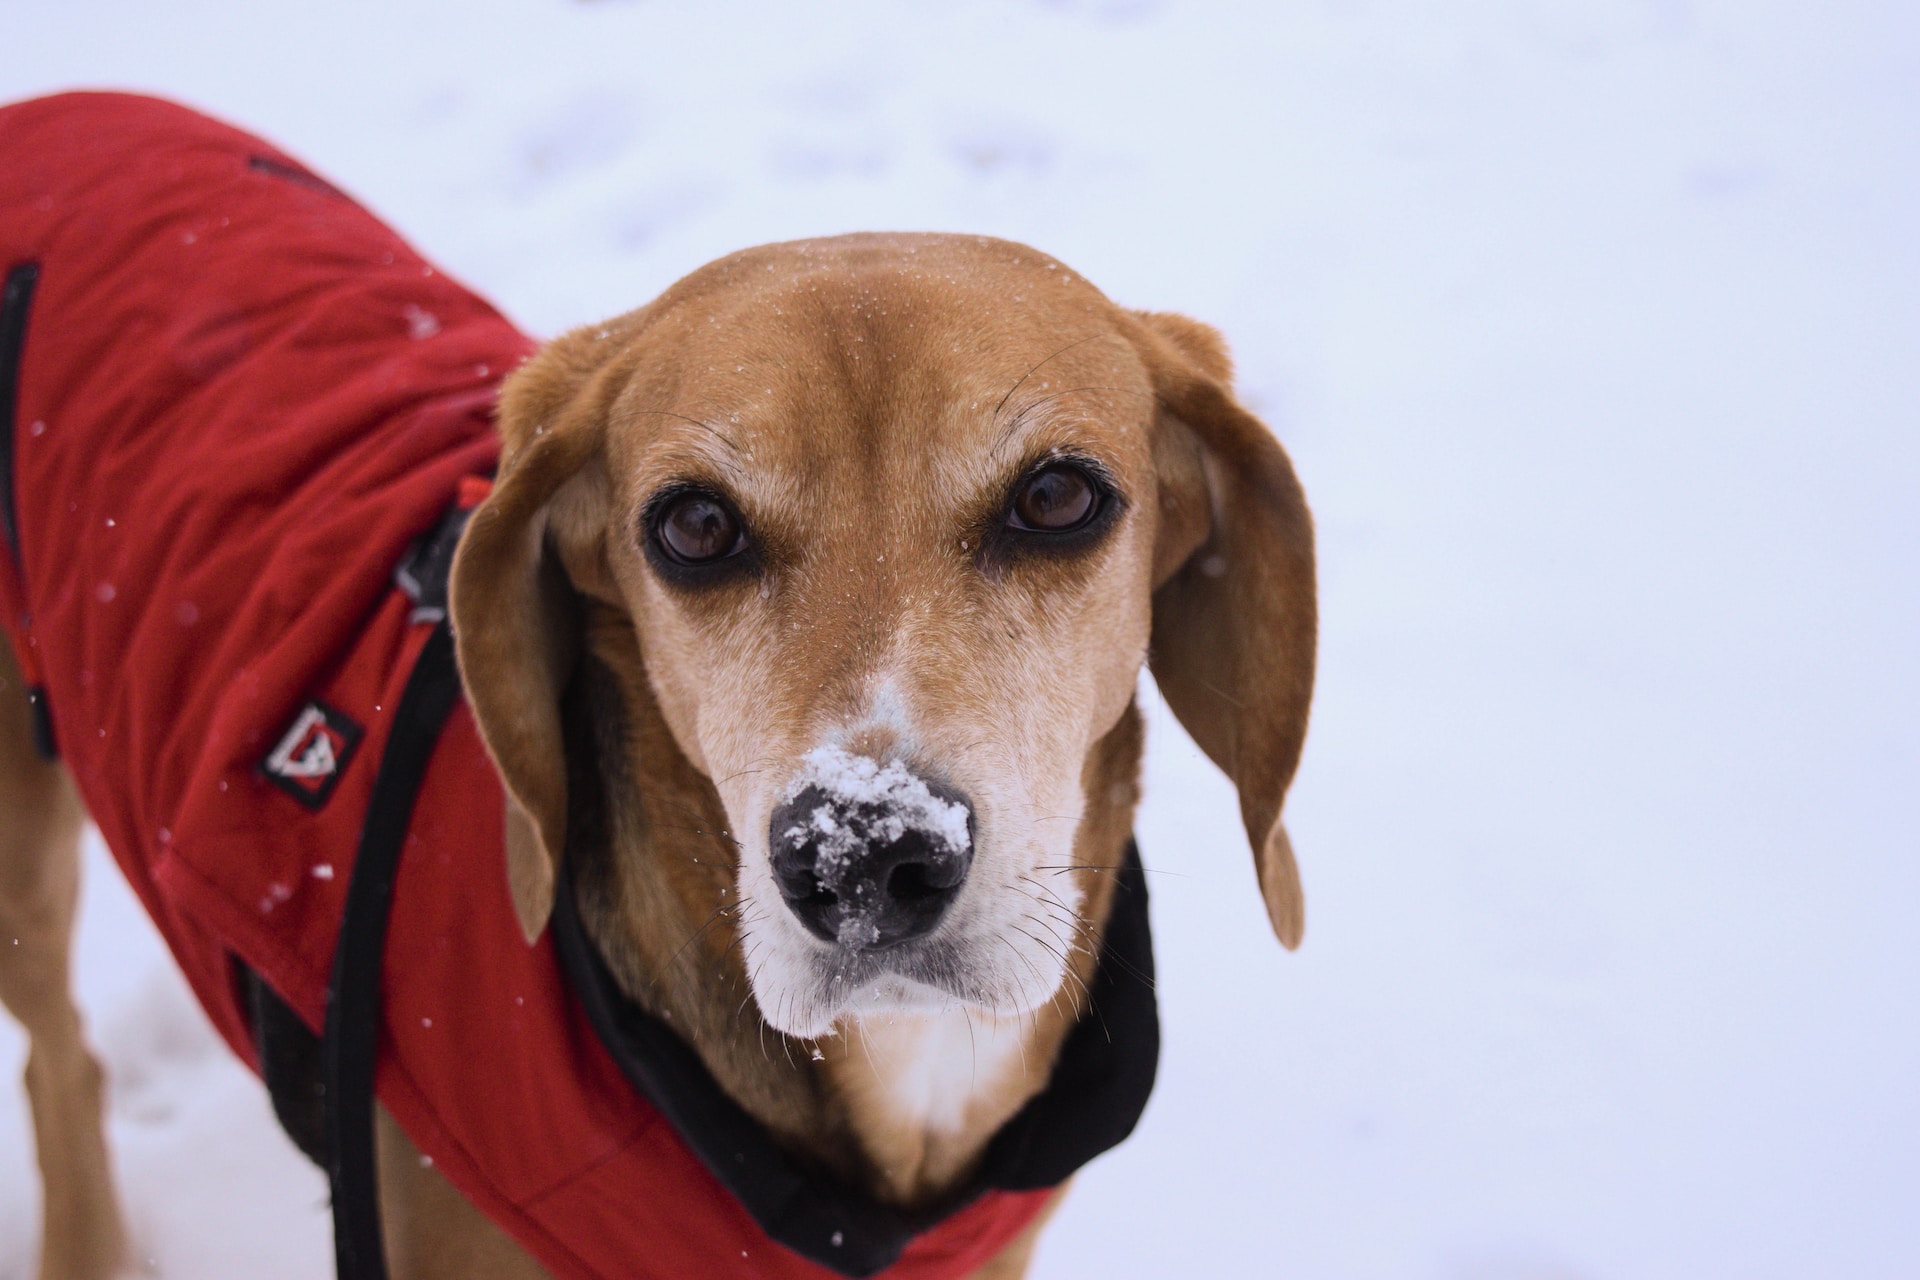 An American Foxhound wearing a red vest in a snowy field